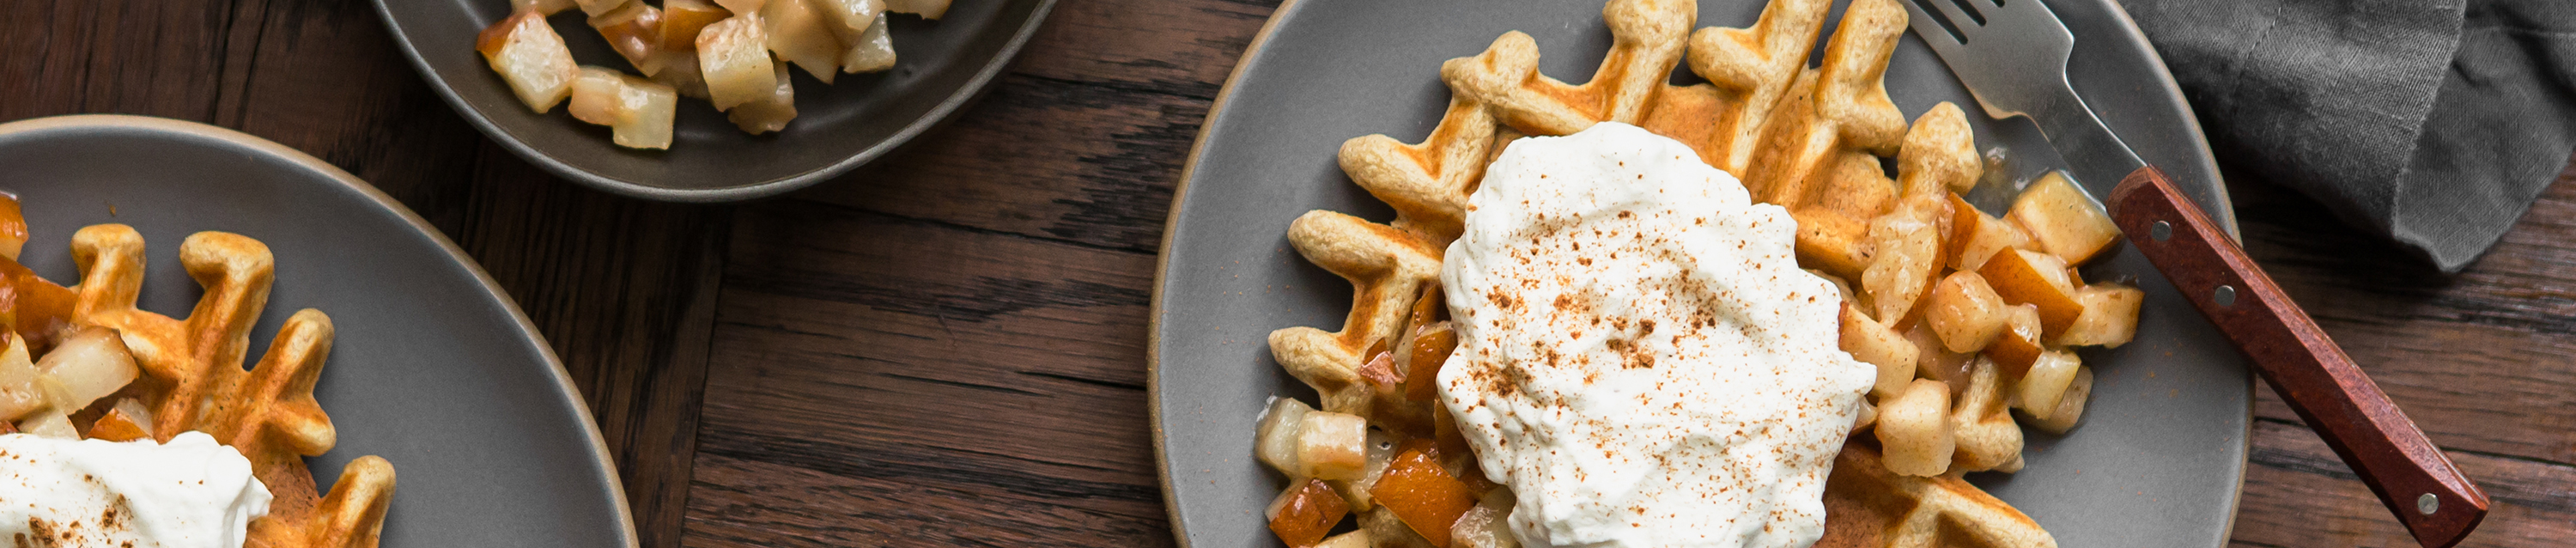 Multigrain Waffles with Cardamom Bosc Pears & Whipped Cream